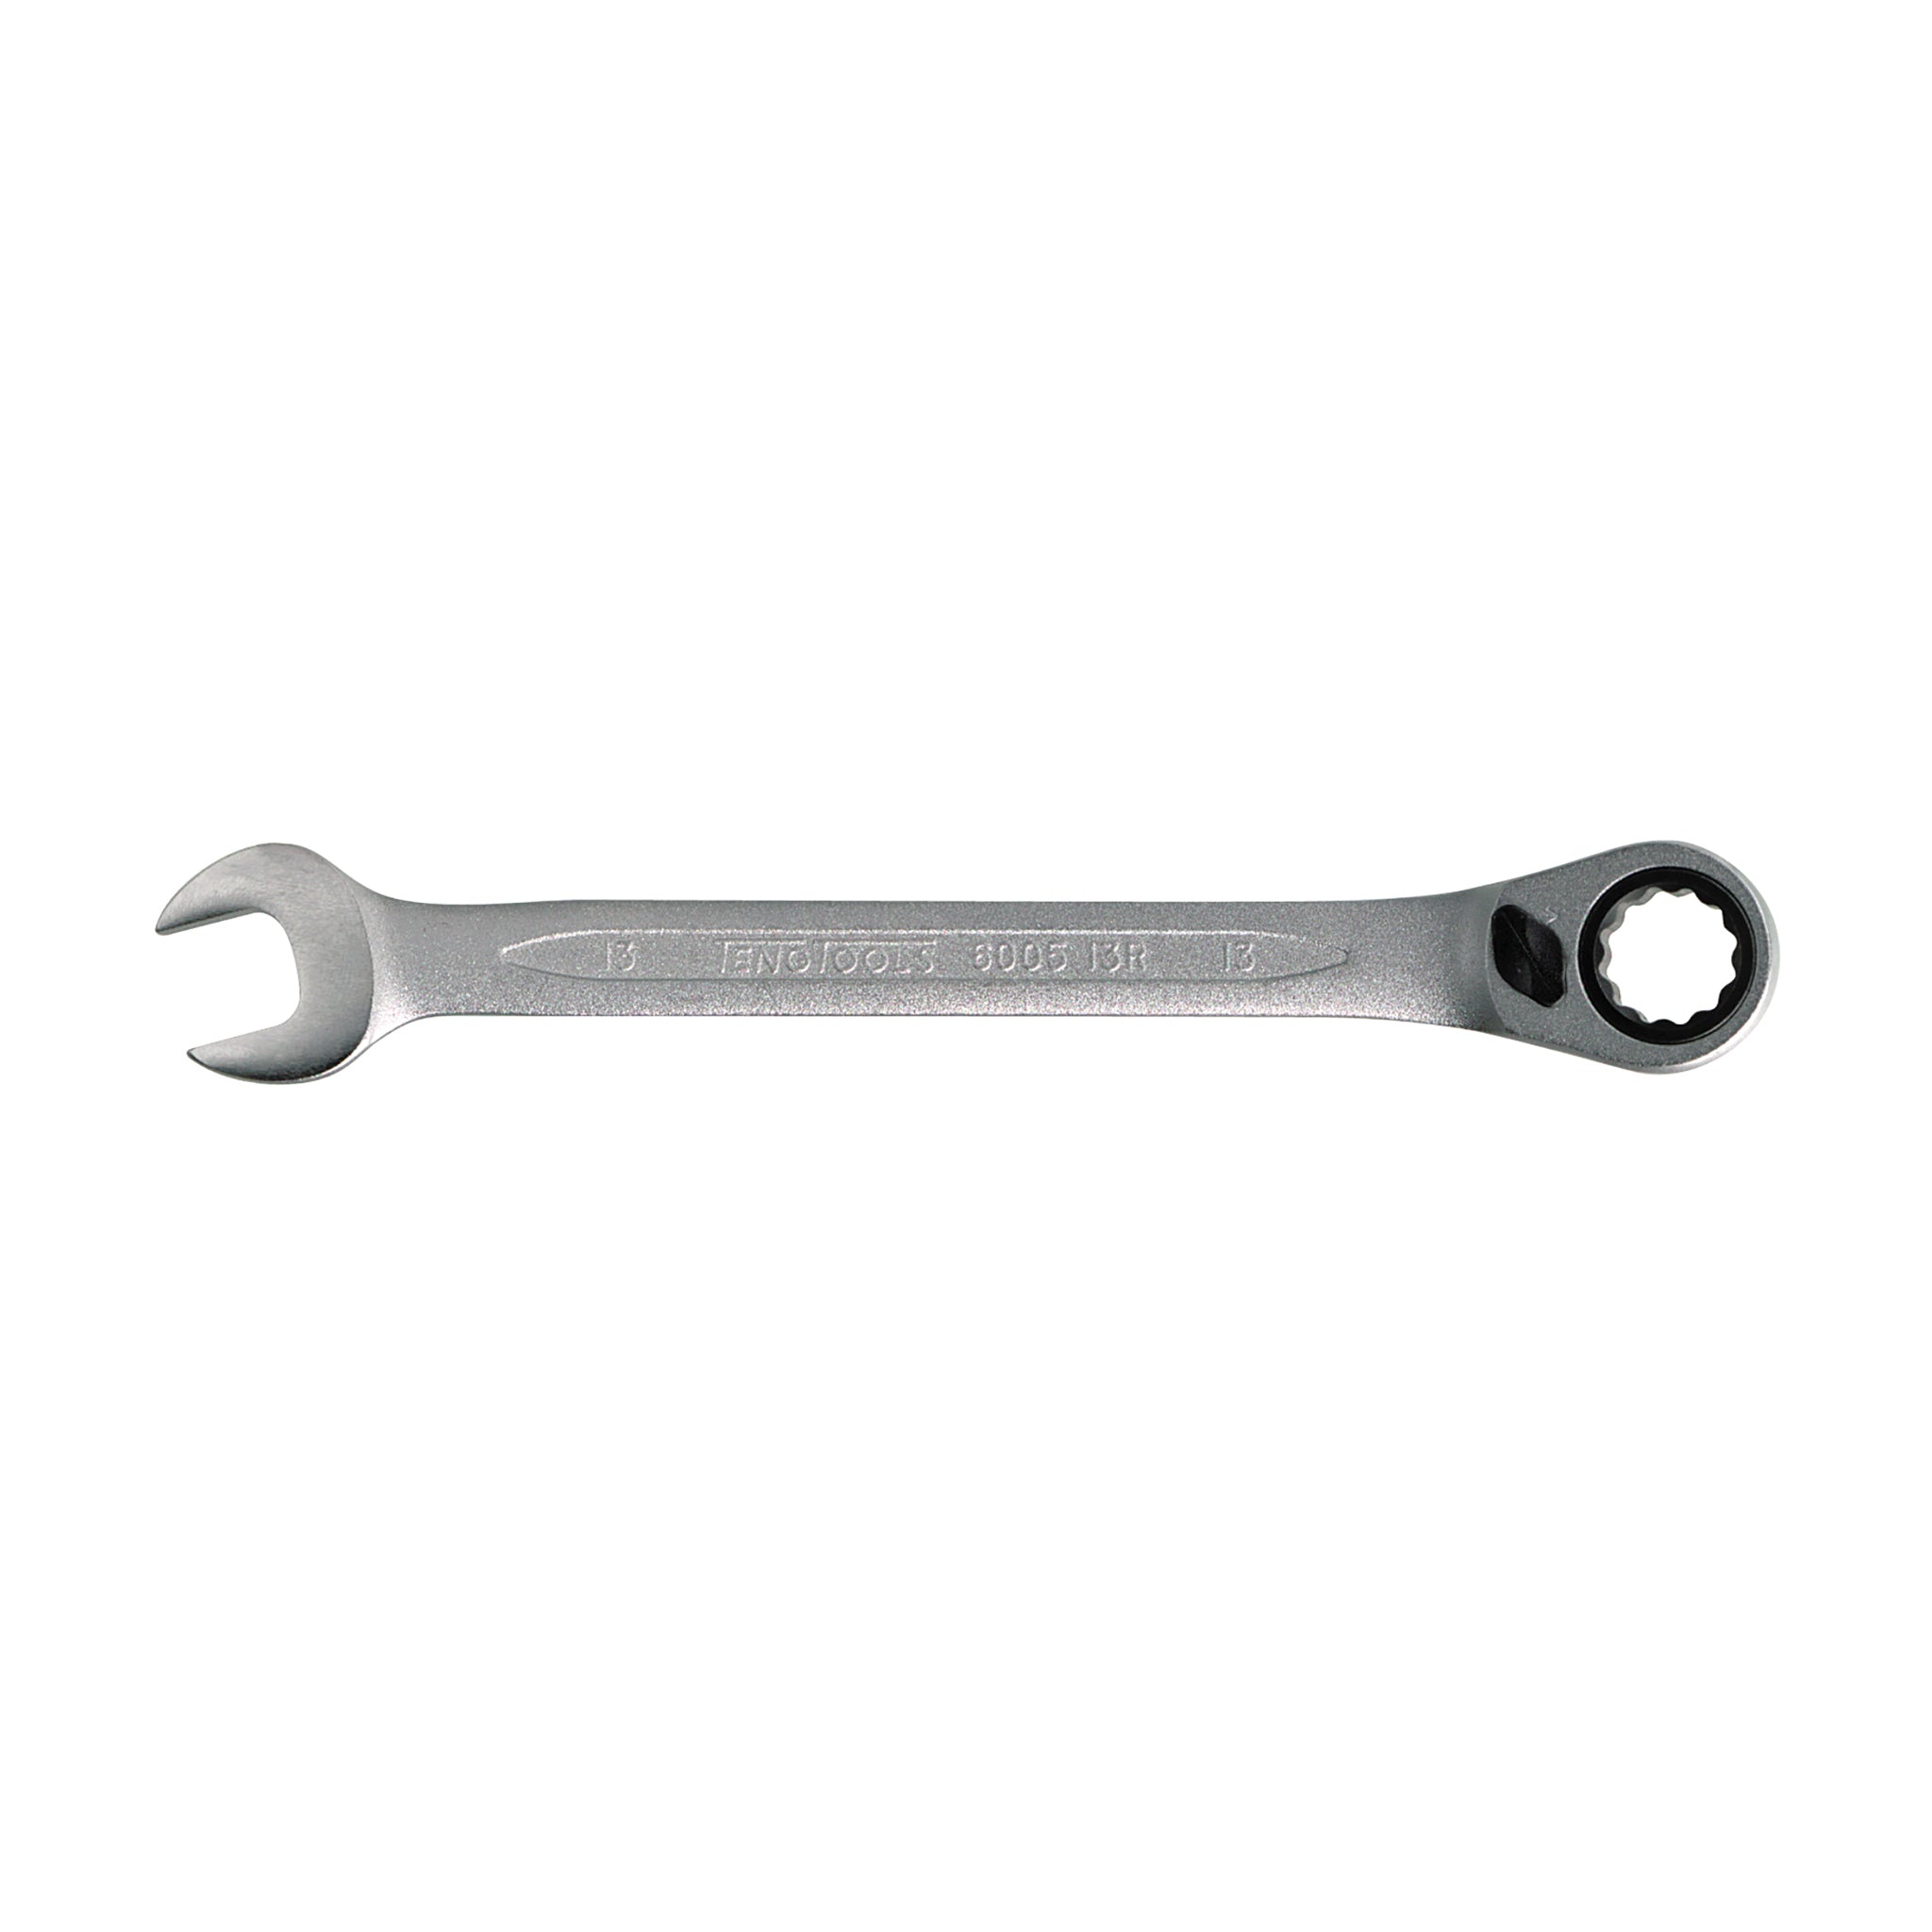 72 Teeth Ratchet Combination Metric Wrenches With Flip Reverse Lever - 17mm